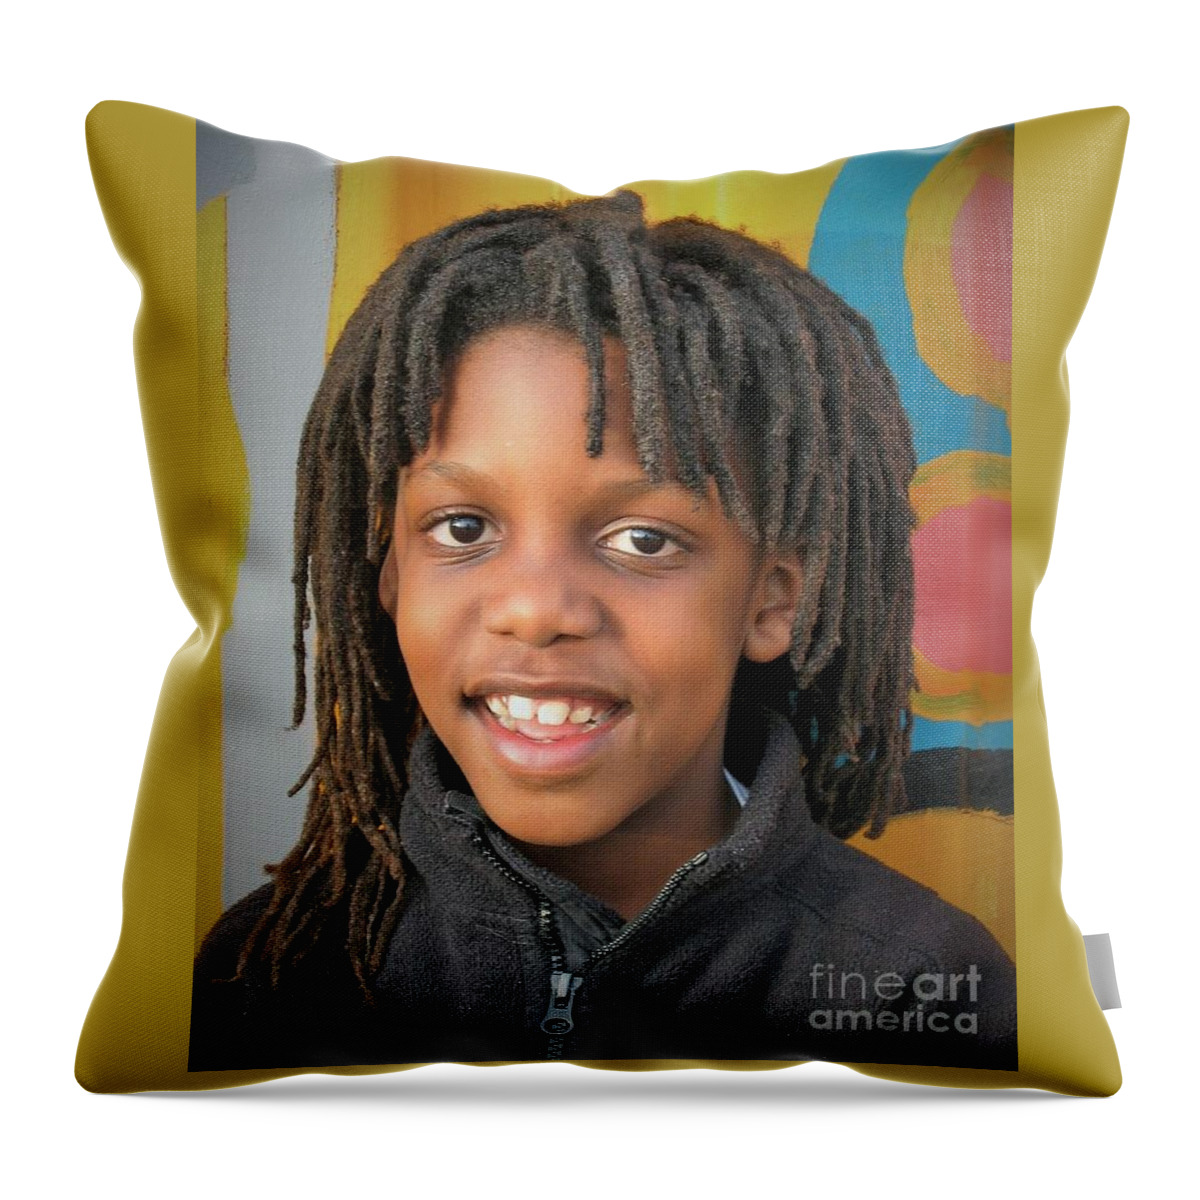 Young Boy Throw Pillow featuring the photograph The Boy Who Wore DreaDs by Angela J Wright